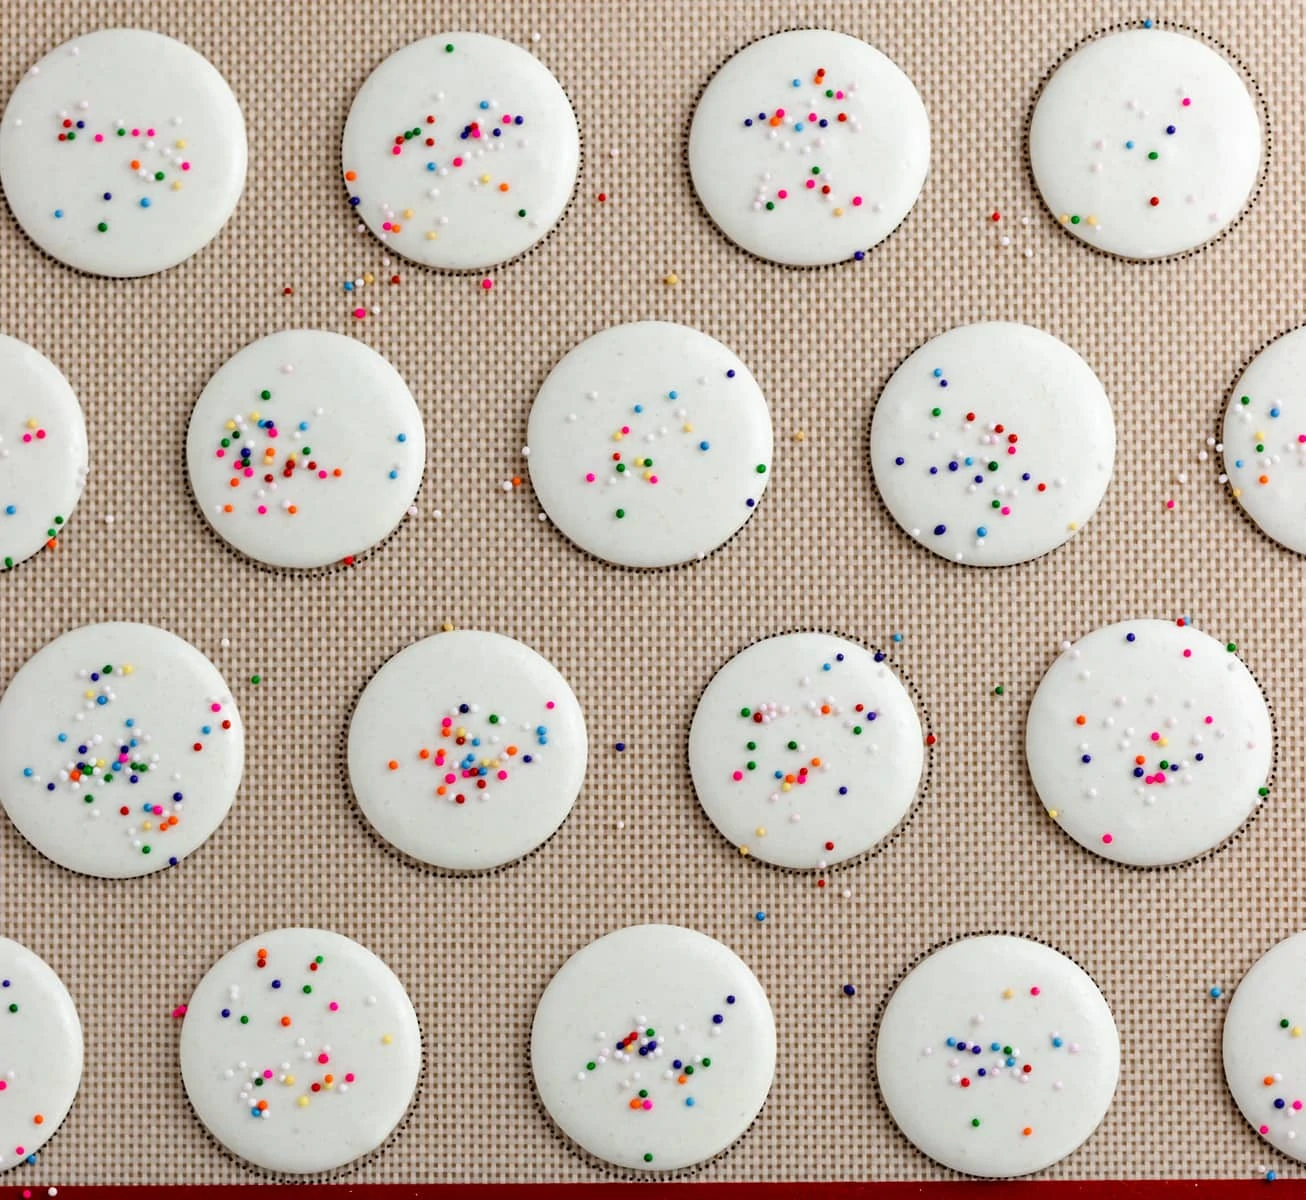 Piped Macaron Shells with Sprinkles